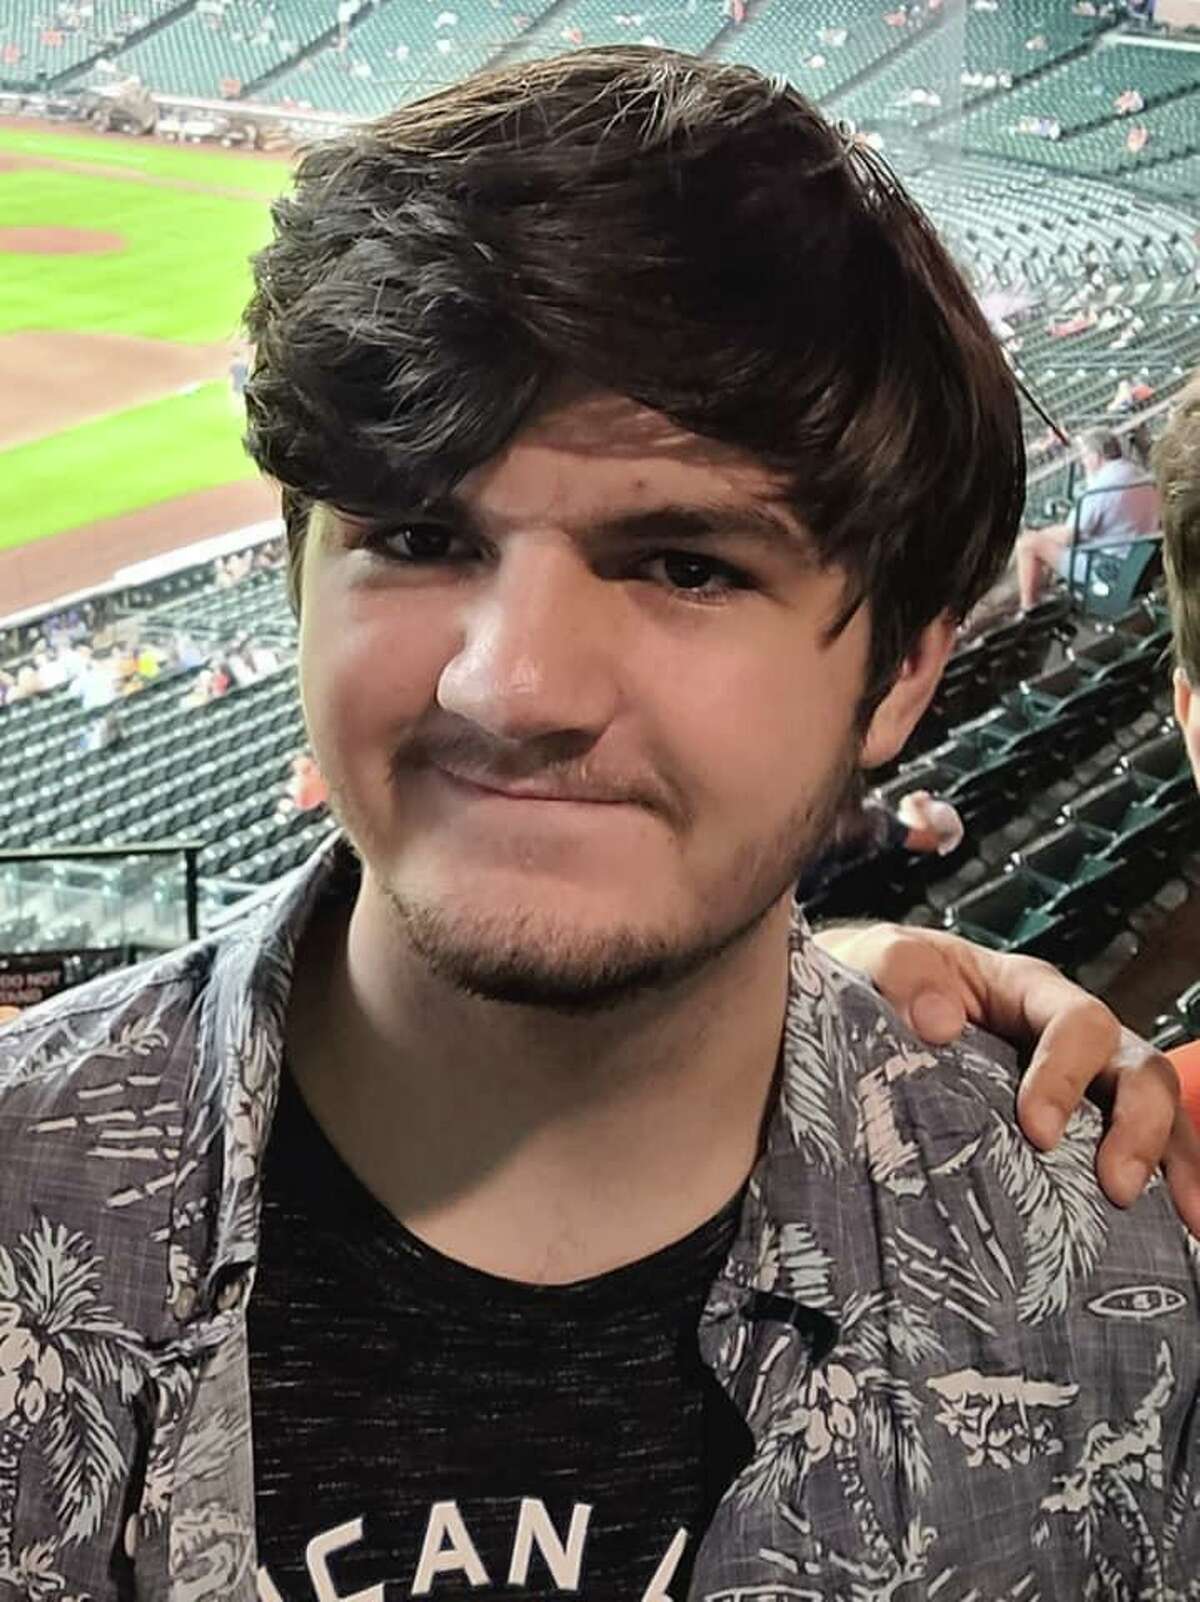 David Castro, 17, was fatally shot July 6 near Wayside Drive and Interstate 10 while on the way home from a Houston Astros game, police said. Authorities are searching for the unknown suspect who opened fire on the family's truck in an apparent act of road rage.